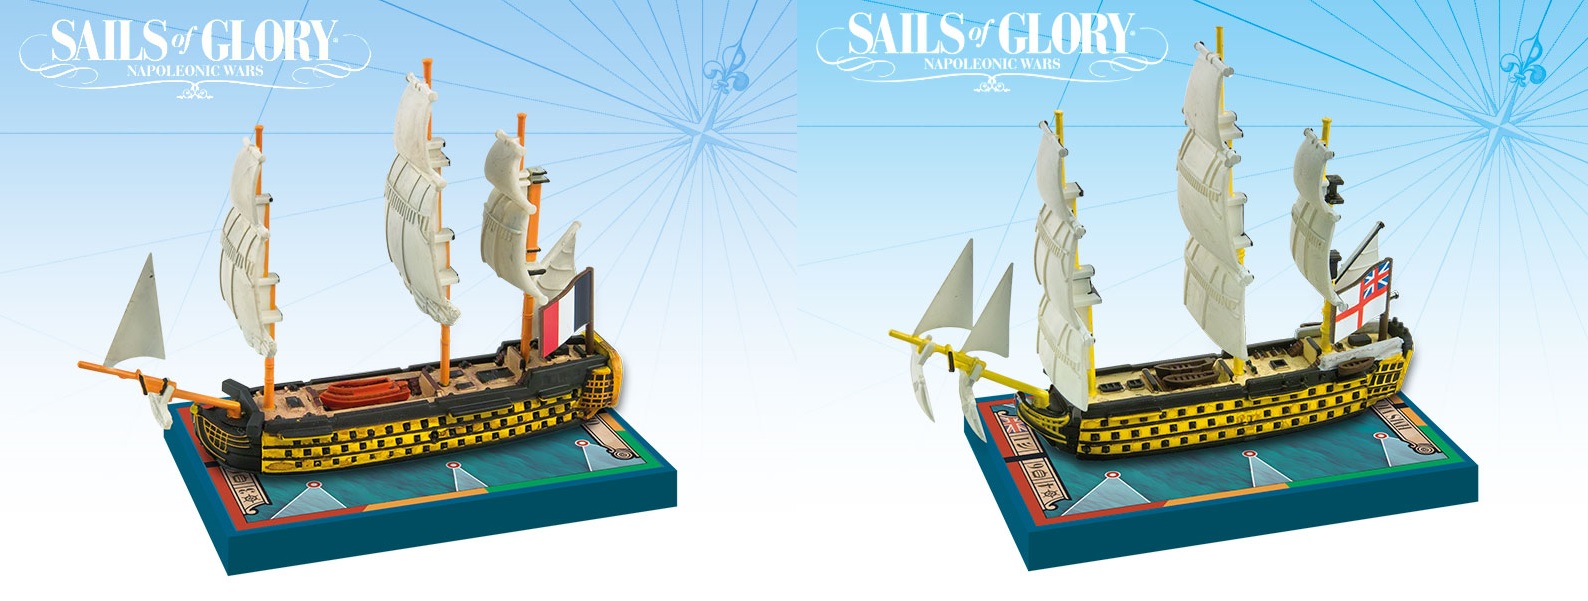 Sails of Glory Orient and HMS Victory.